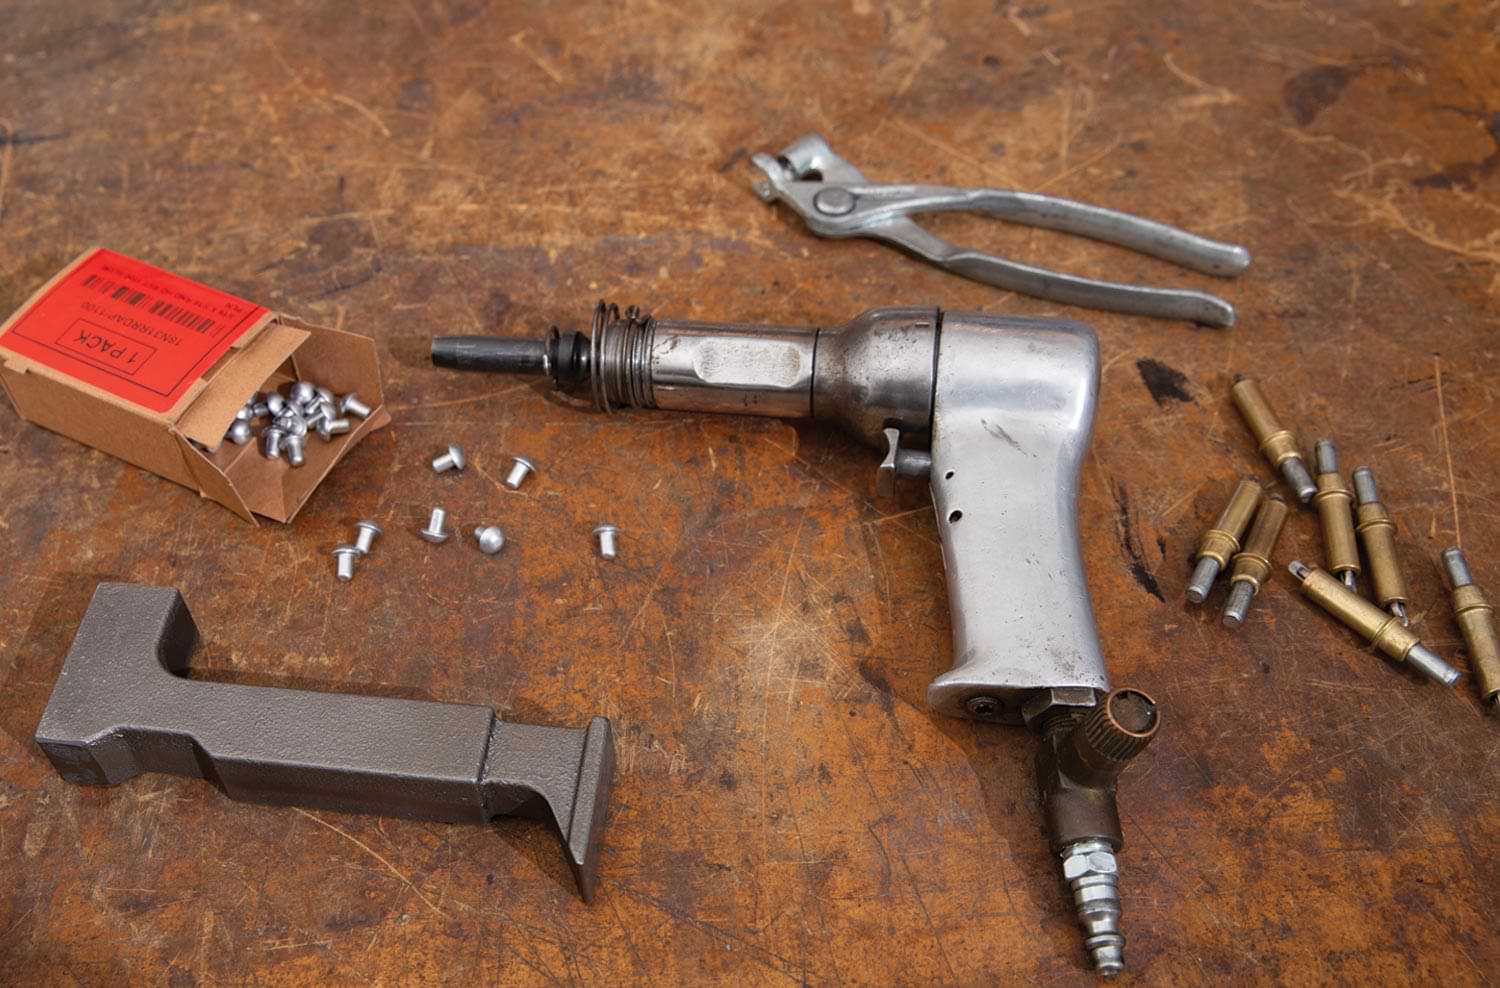 the required tools for assembly are laid out on a table, including an air hammer (PN 72819750) with control pressure regulator, 3/16-inch rivet set (PN 91010012), bucking bar (PN 9101500), 3/16-inch Clecos and Cleco tool kit (PN 9108575), and 3/16-inch rivets